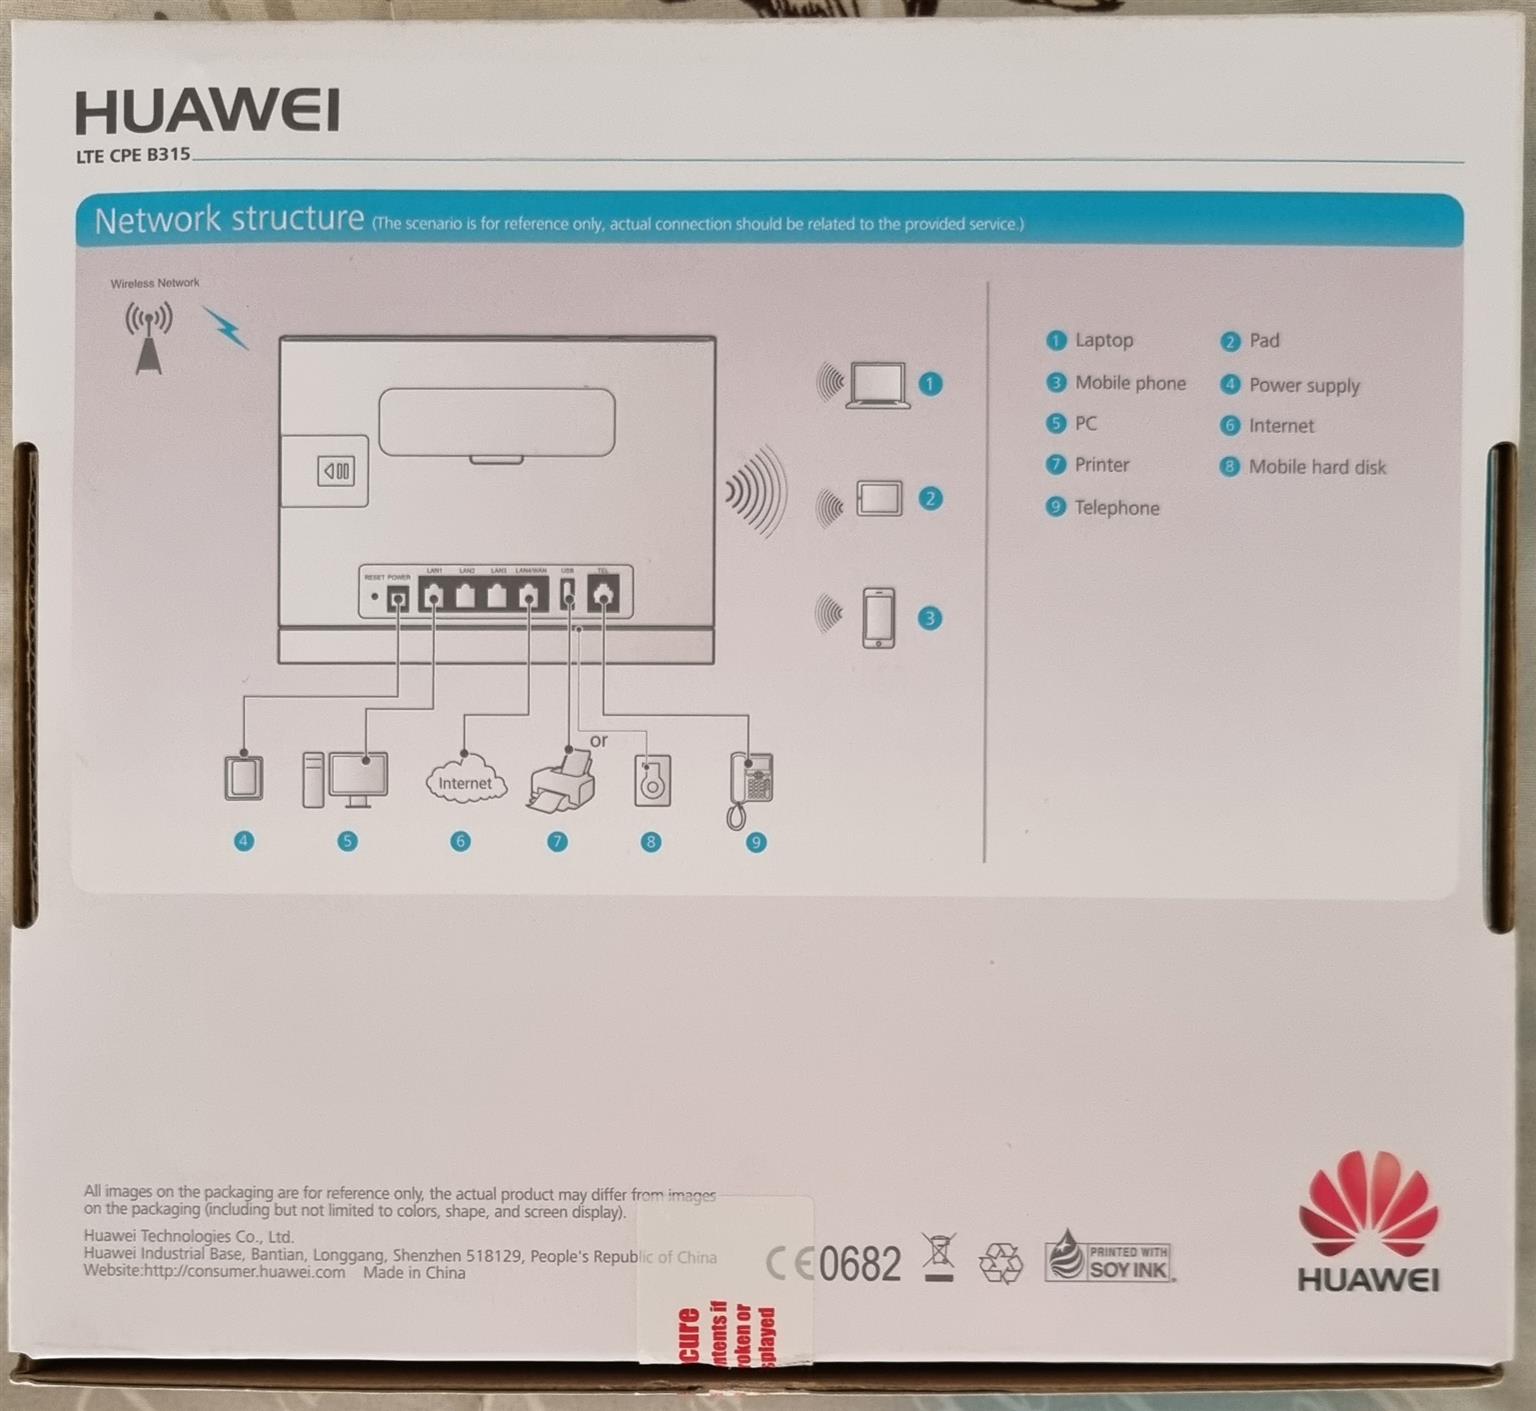 Huawei B315 4G LTE WiFi Router (open to all networks, incl. Rain)